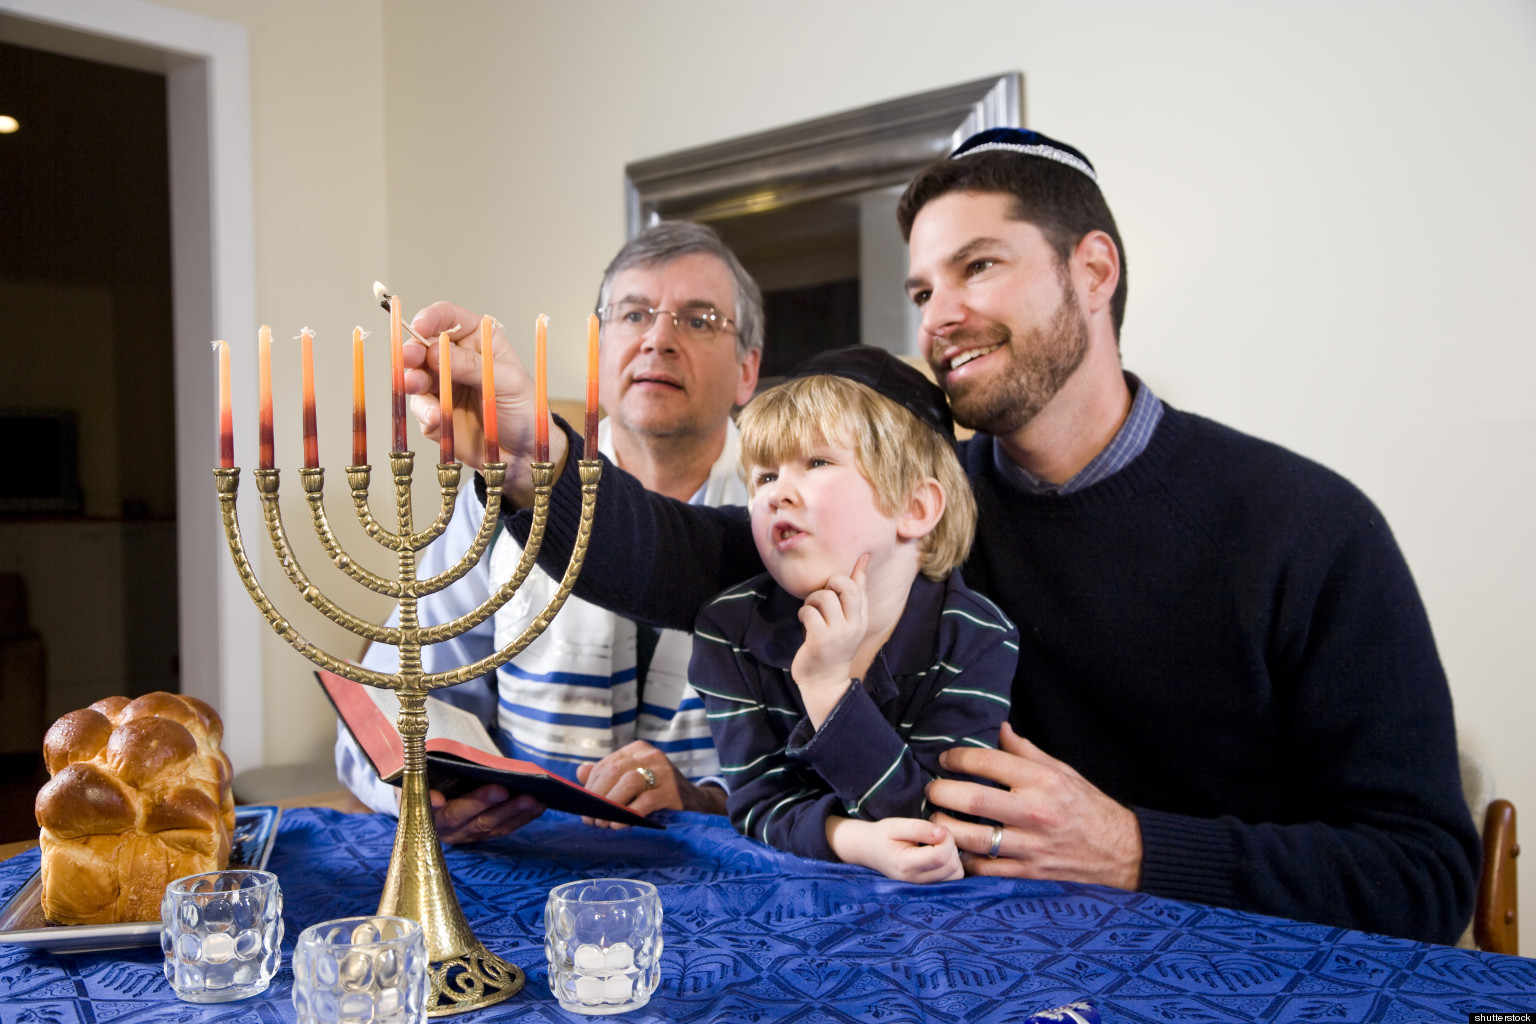 Why is Hanukkah important to Jewish people?